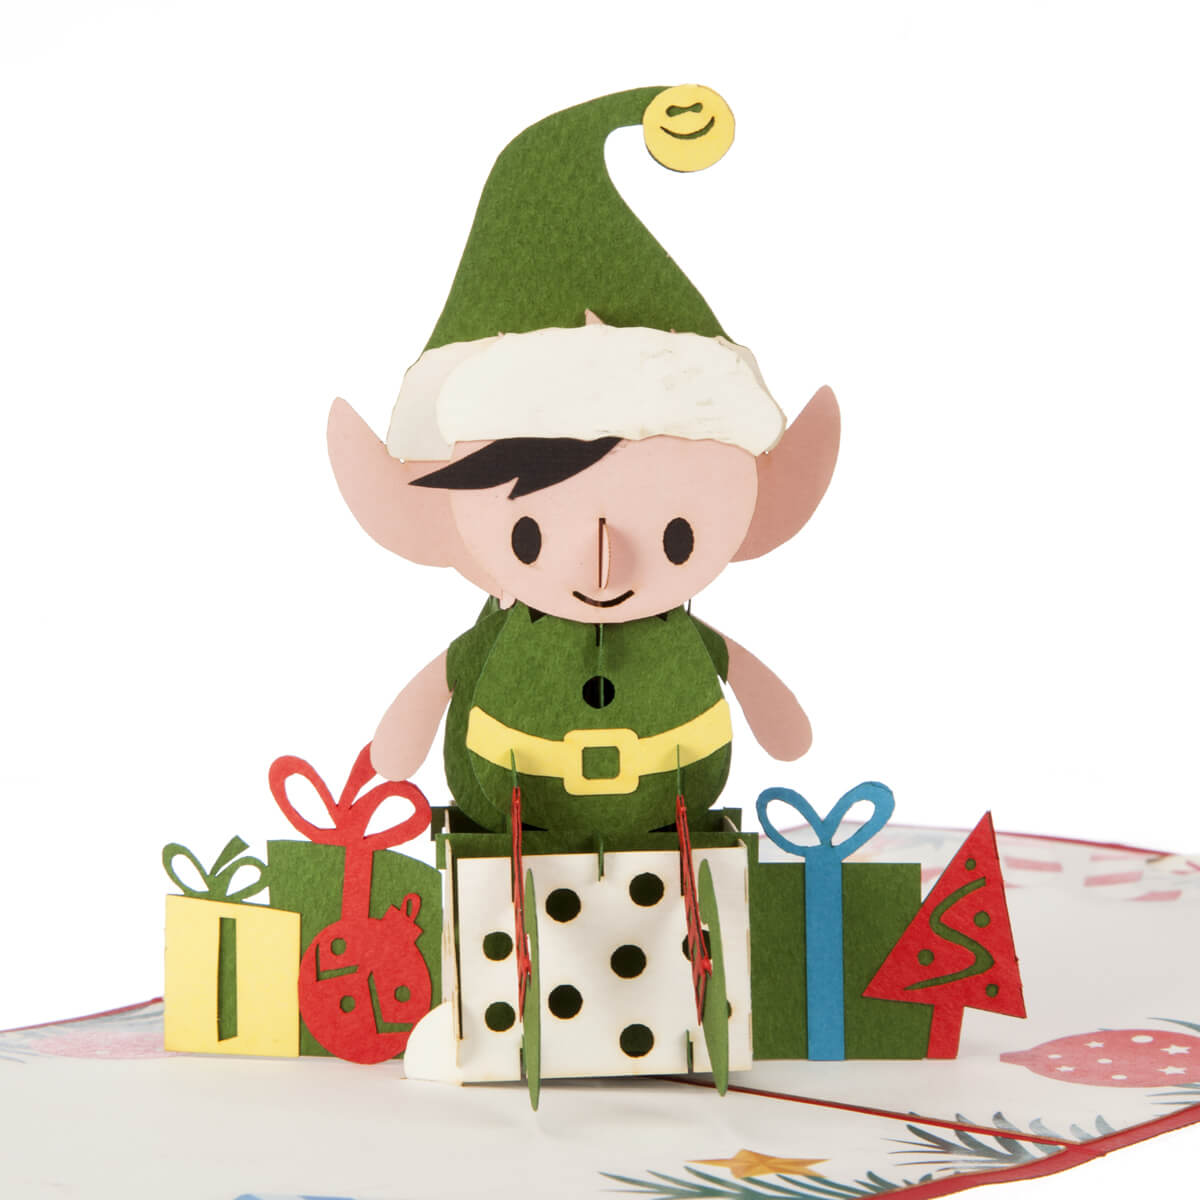 close up image of Elf Christmas Pop Up Card featuring an elf sitting on a mound of presents